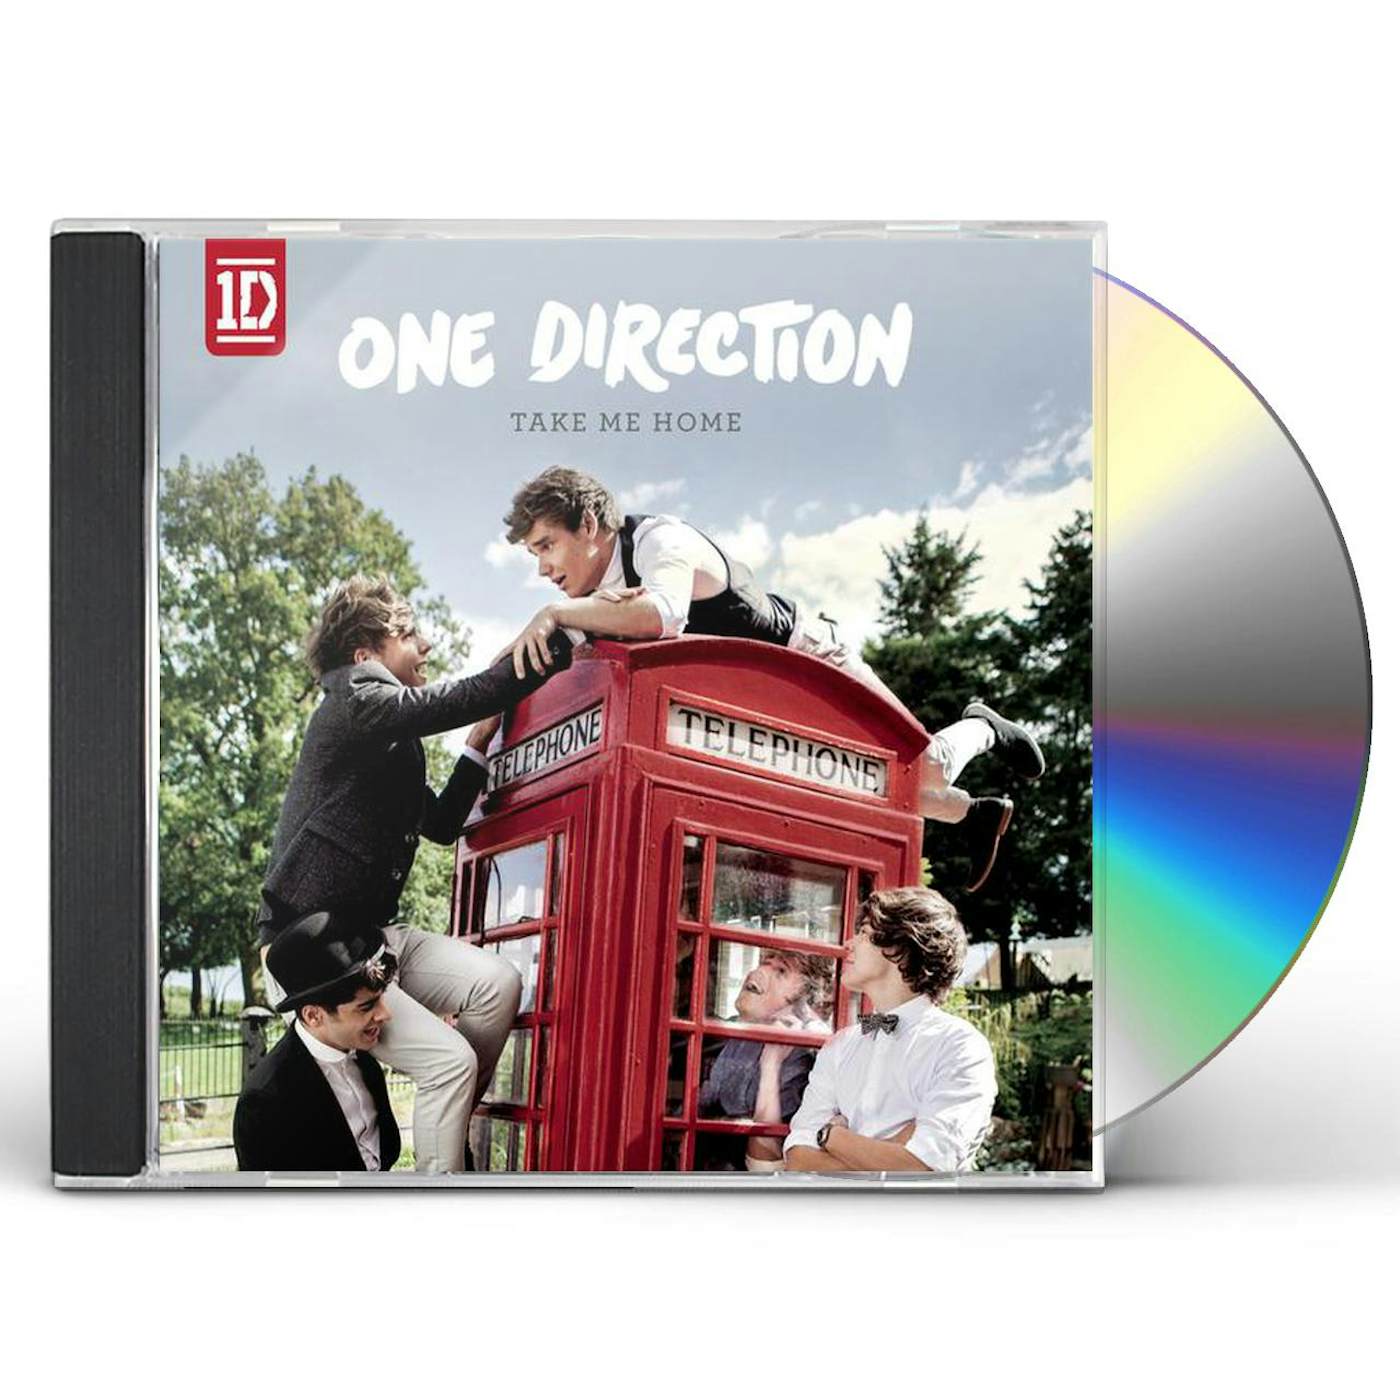 One Direction TAKE ME HOME CD